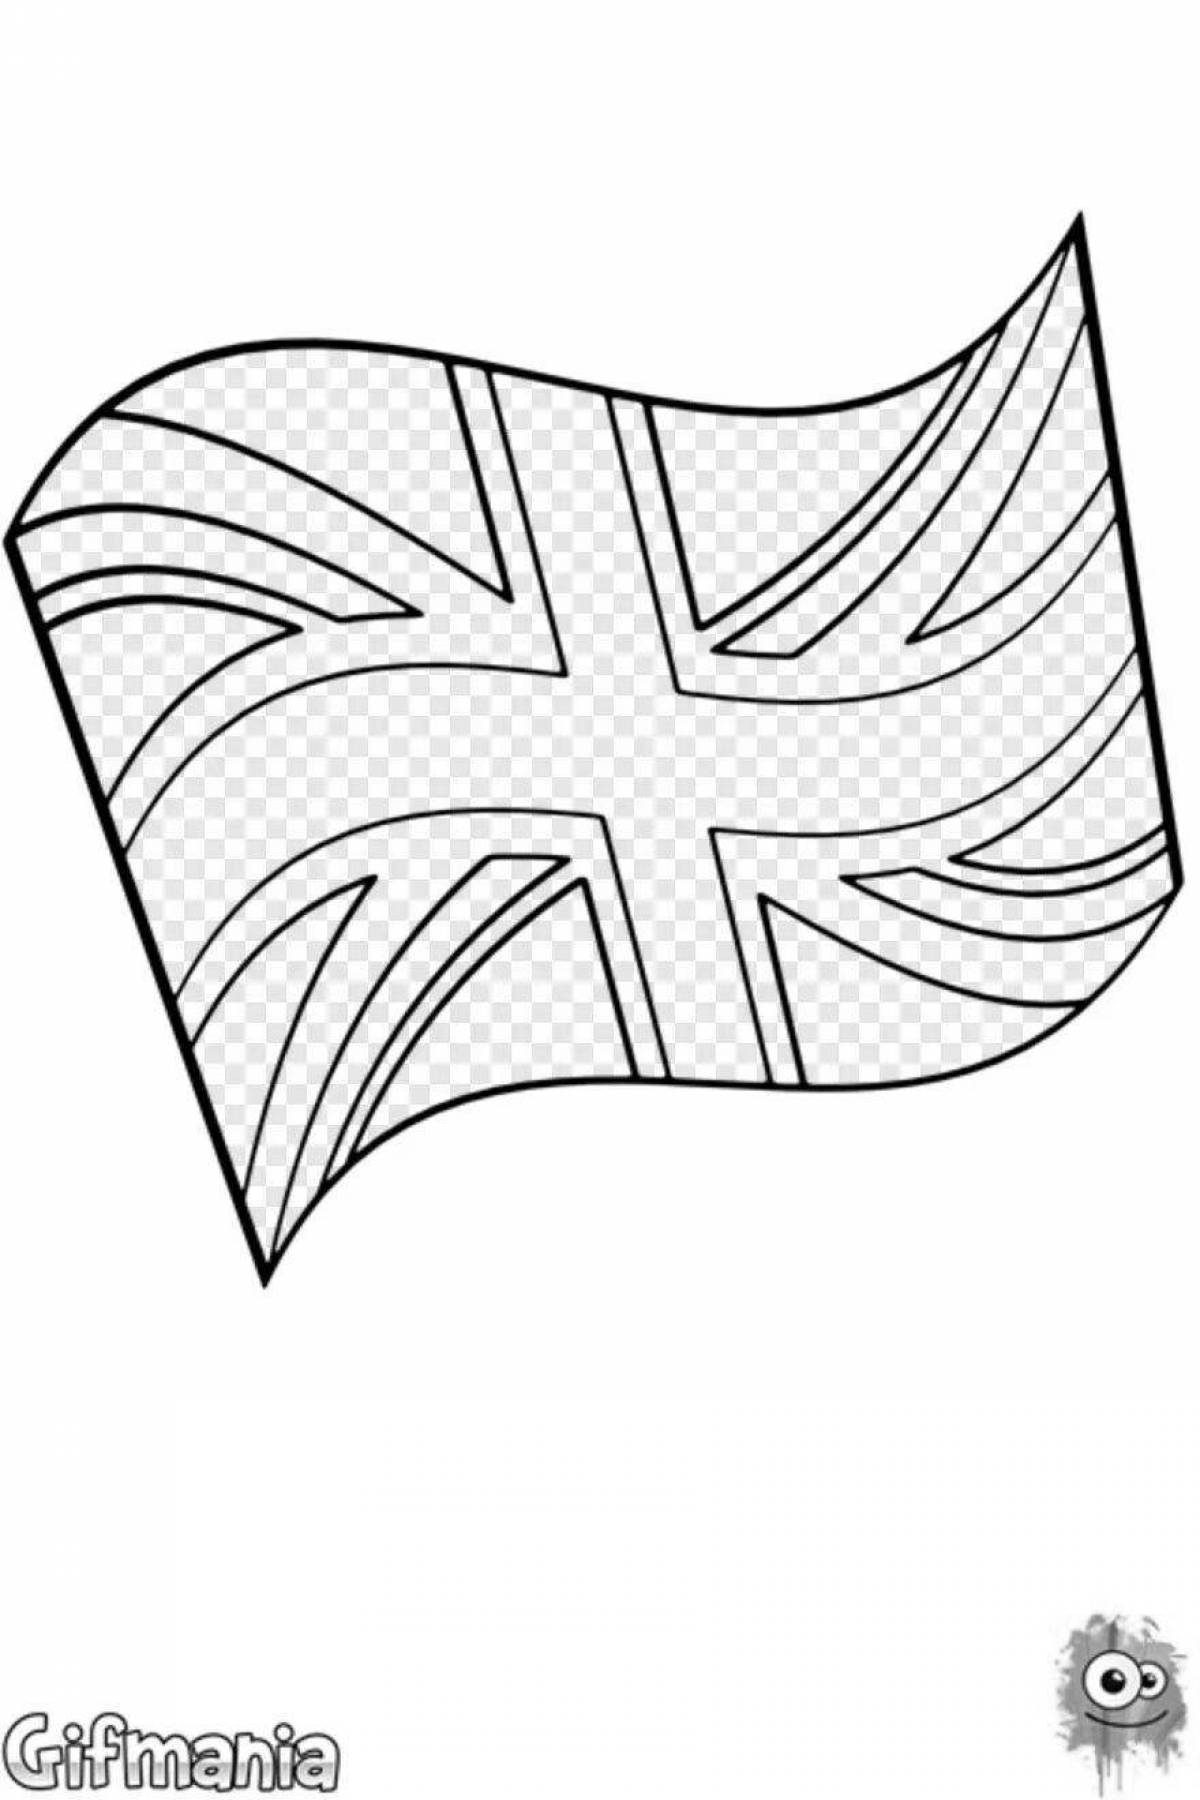 Fun coloring of the British flag